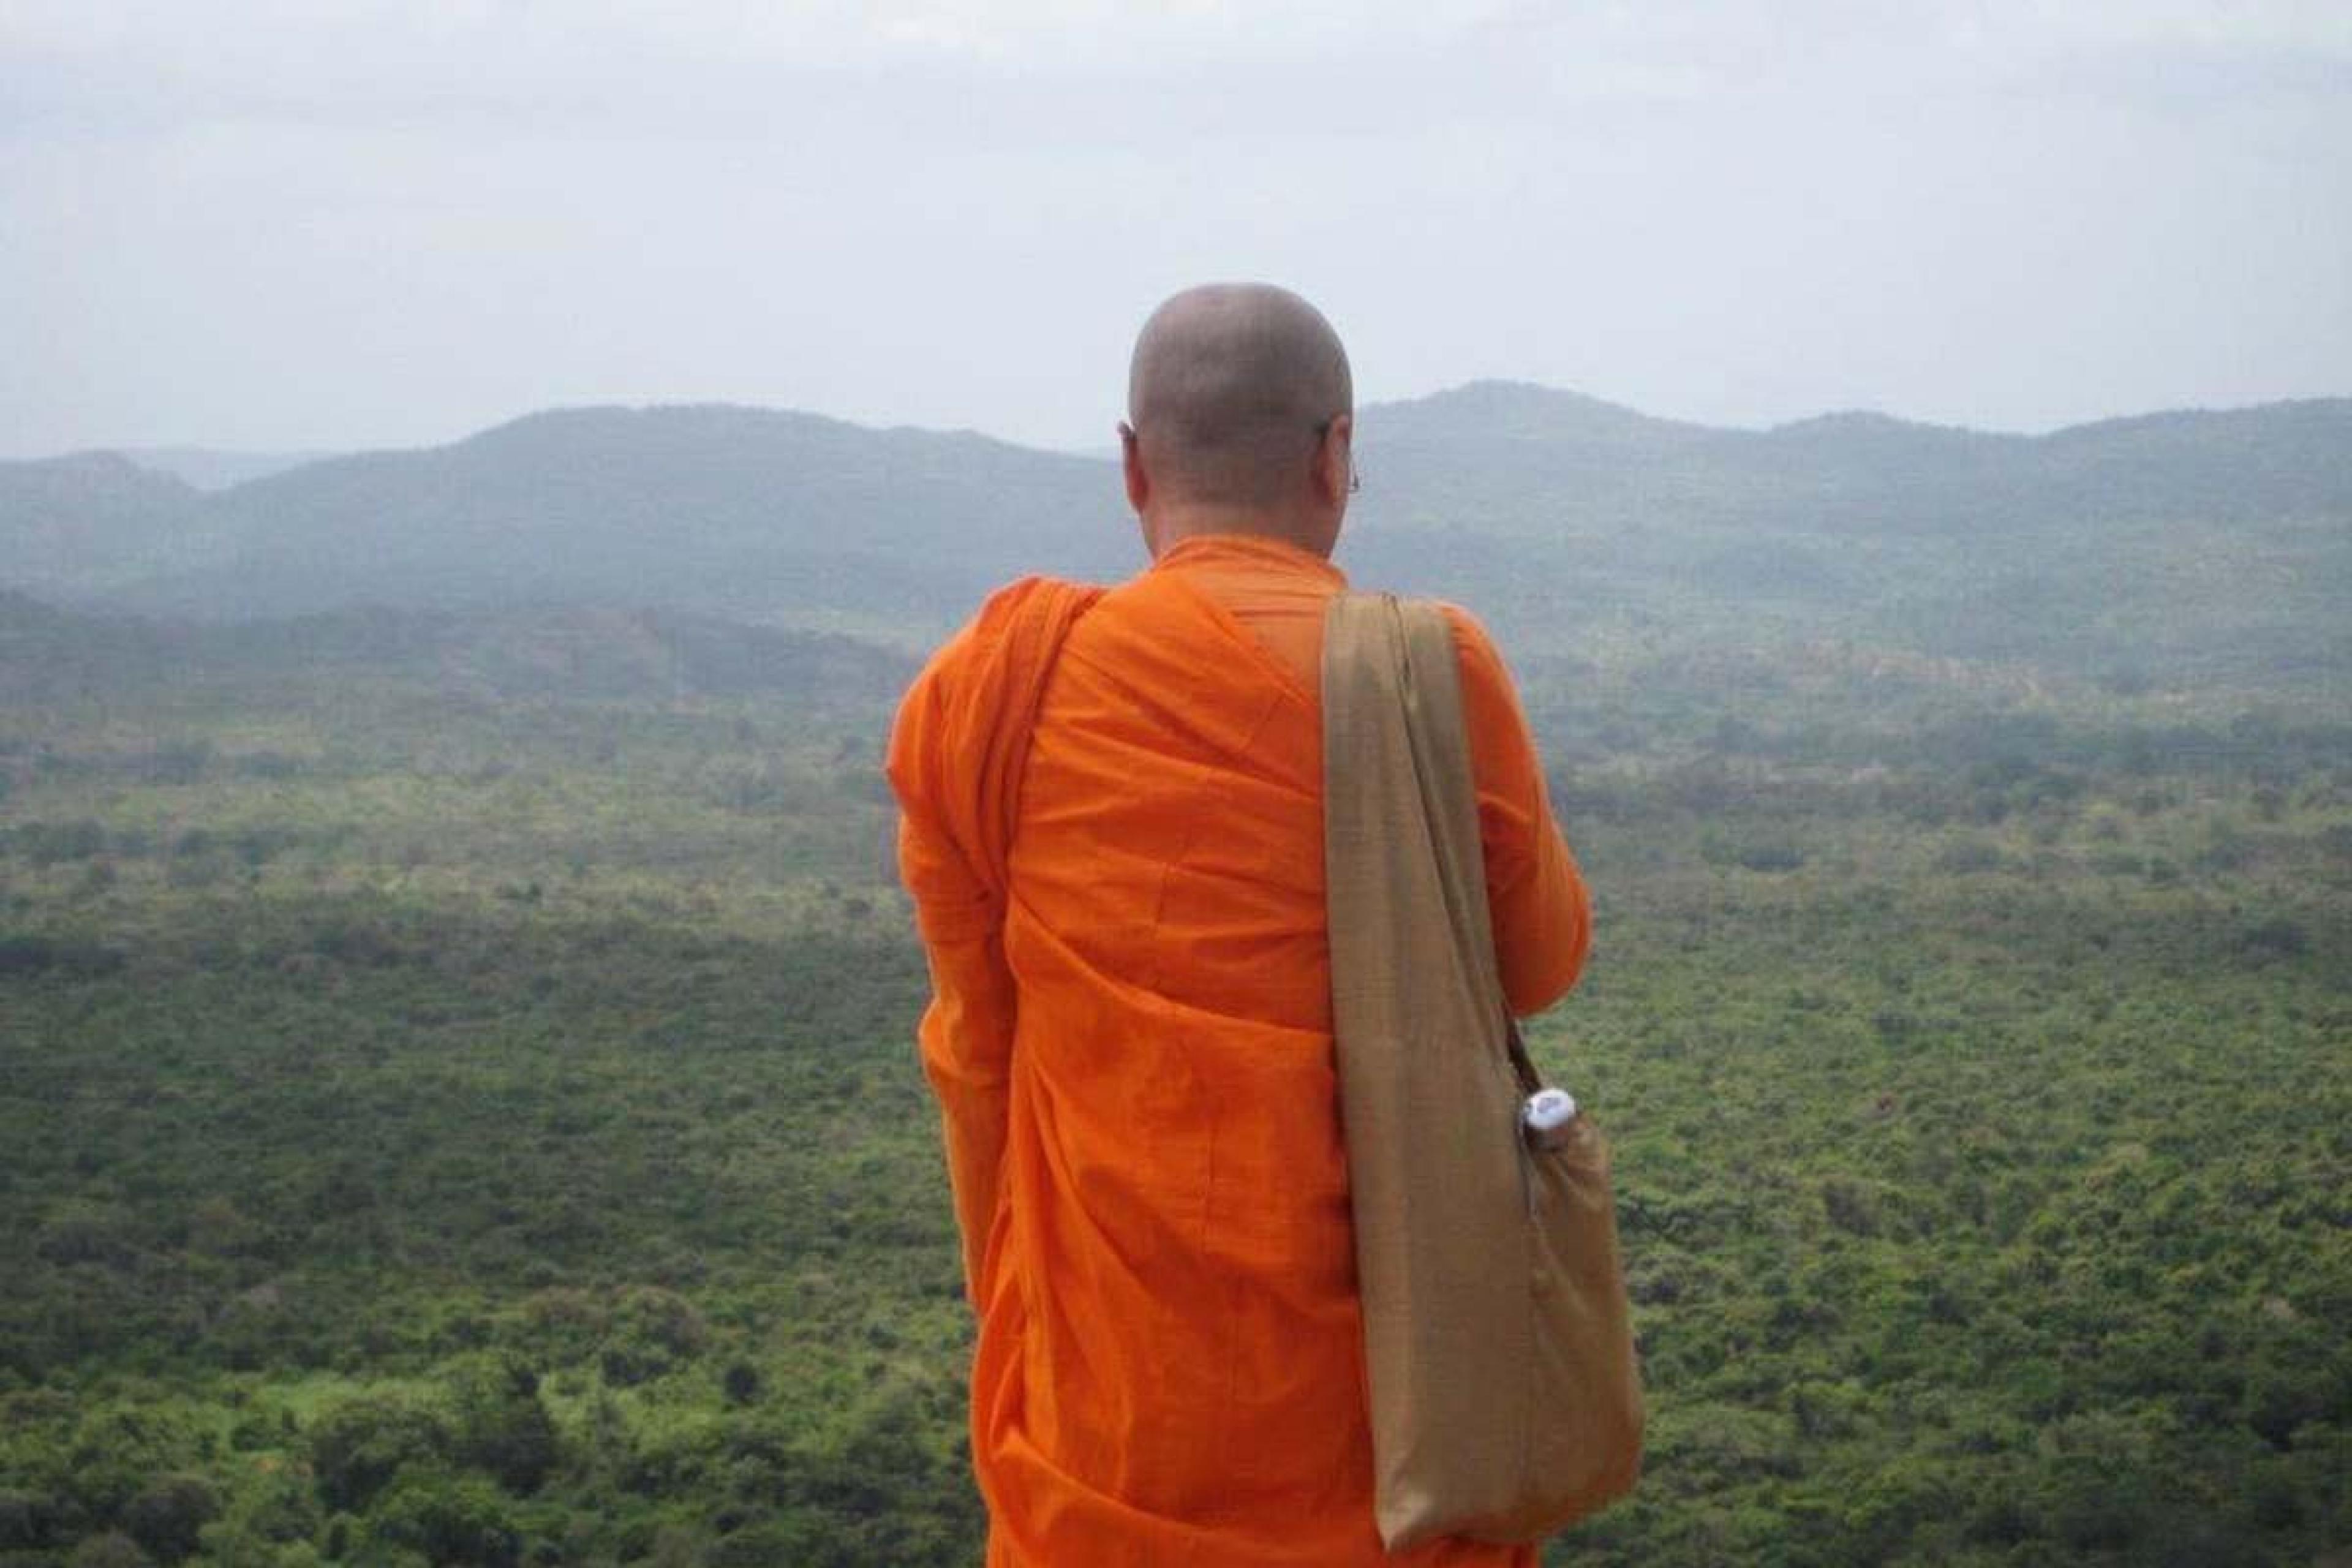 monk in an orange robe looking out over a misty green landscape